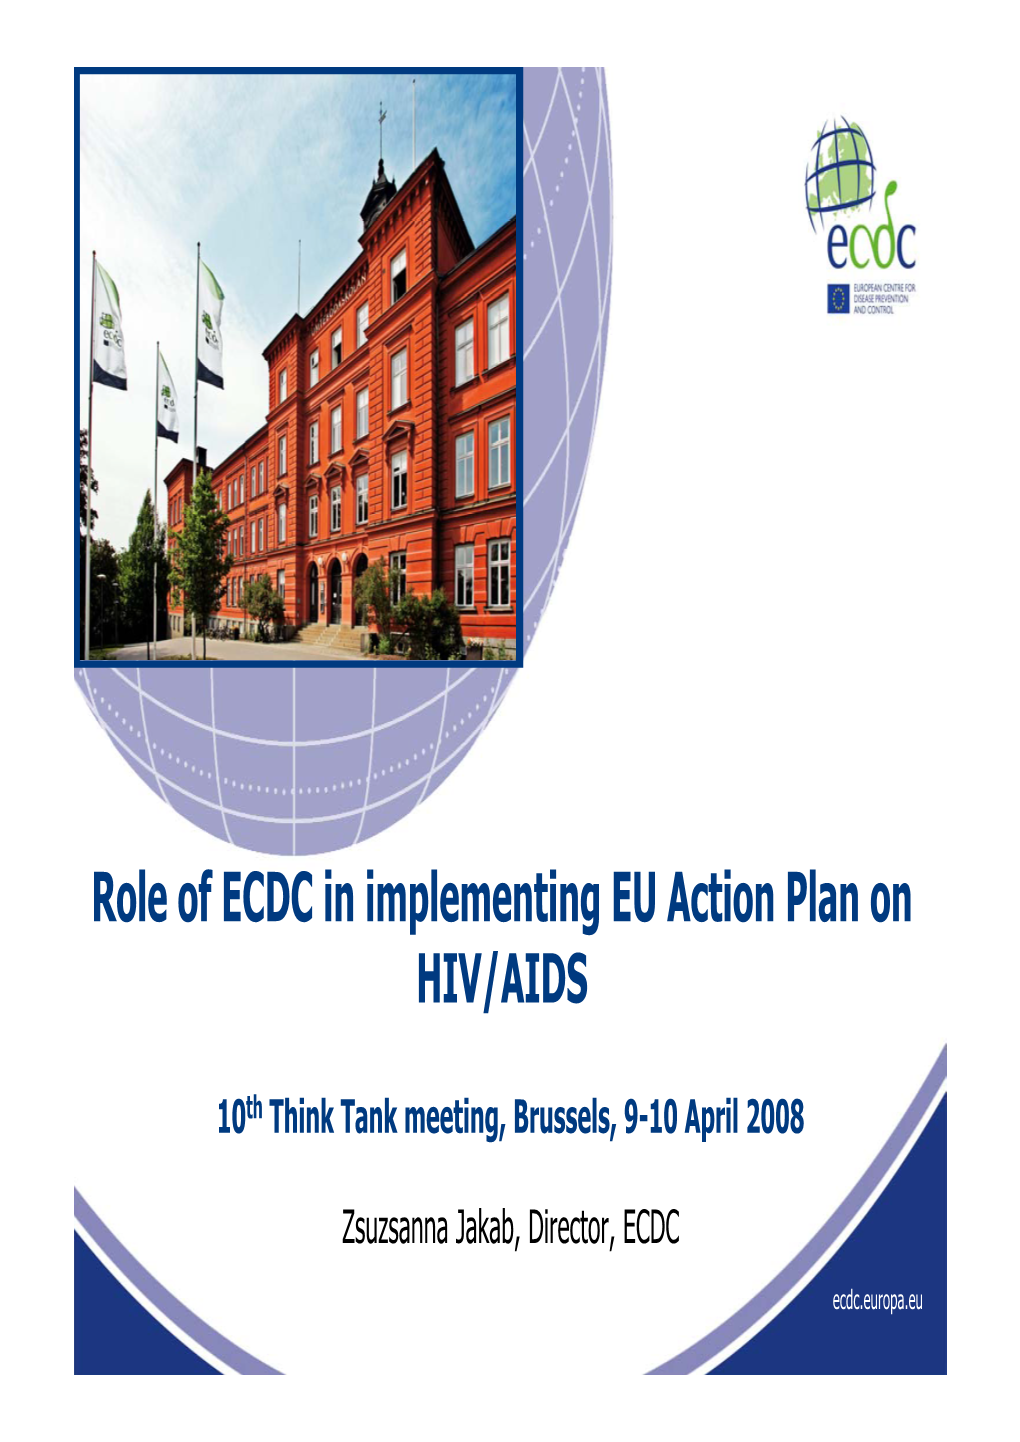 Role of ECDC in Implementing EU Action Plan on HIV/AIDS